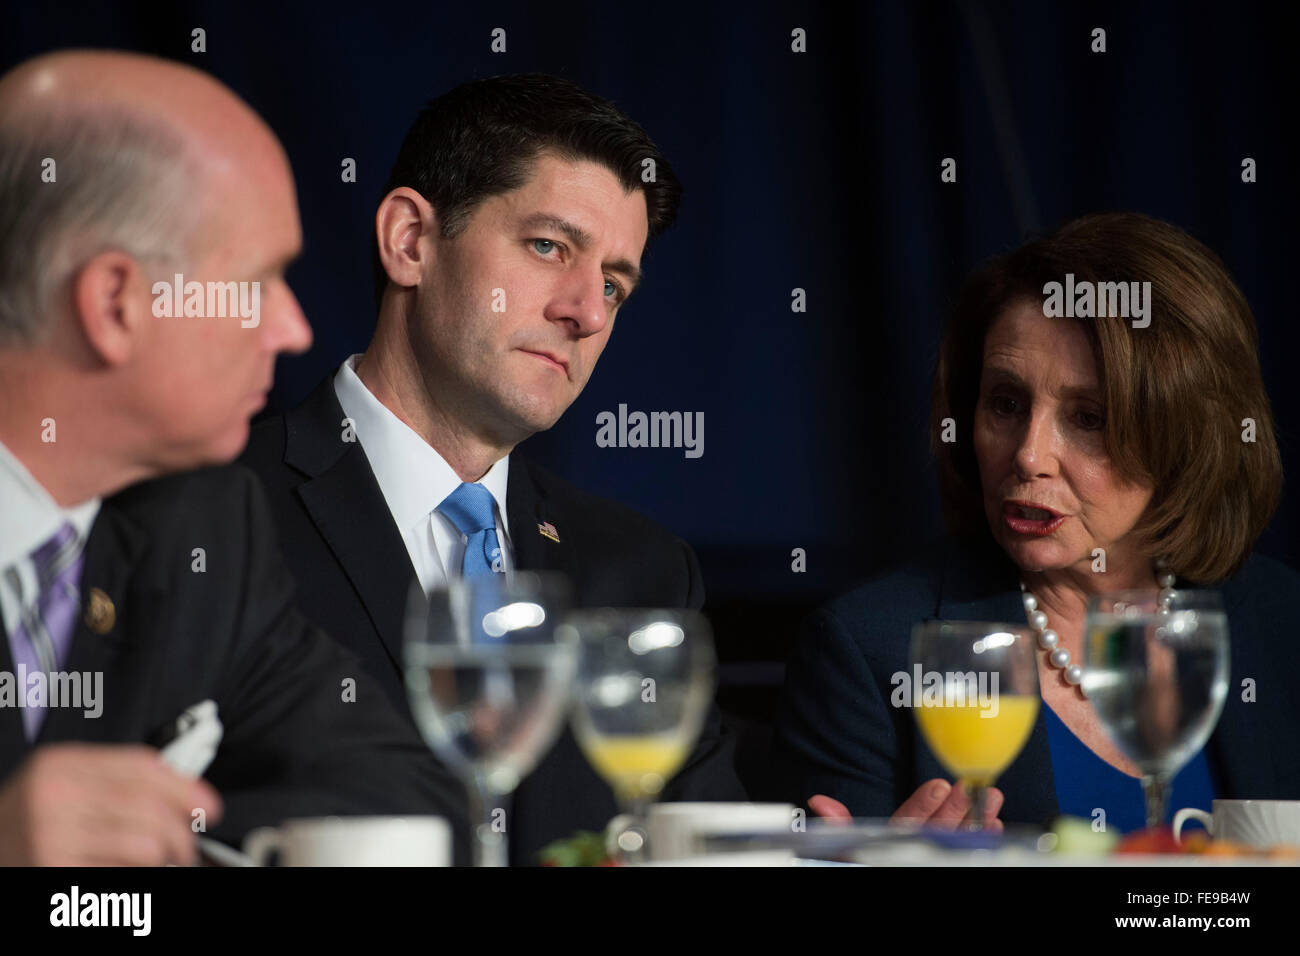 Washington, DC, USA. 04th Feb, 2016. US Speaker of the House Paul Ryan (Republican of Wisconsin), center, talks with former US Speaker of the House Nancy Pelosi (Democrat of California), right, prior to the National Prayer Breakfast in Washington, DC, USA, 04 February 2016. For 63 years the National Prayer Breakfast has given presidents the opportunity to gather with members of Congress and evangelical Christians to pray and talk about the role of prayer in their own lives. Credit: Shawn Thew/Pool via CNP /dpa - NO WIRE SERVICE - Credit:  dpa/Alamy Live News Stock Photo